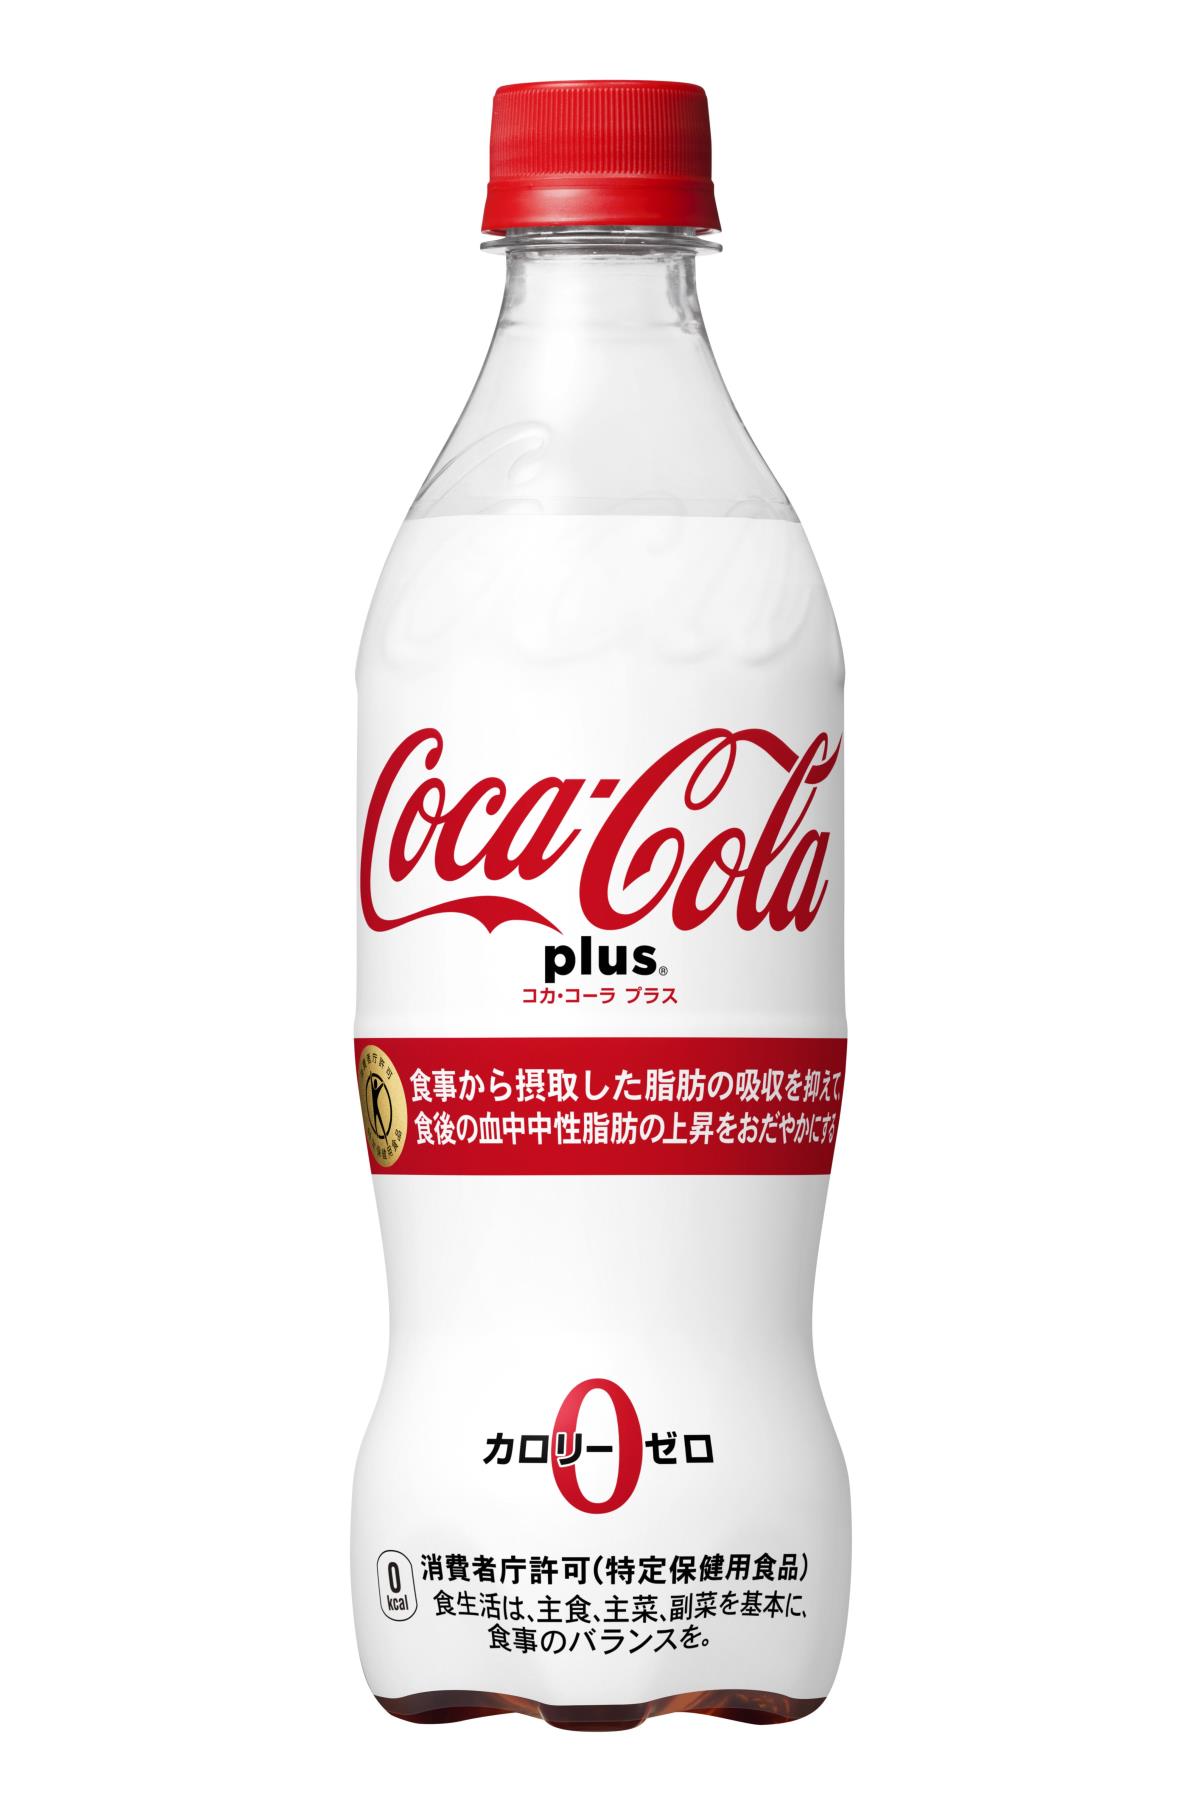 Coca-Cola Introducing Bottles With Caps That Stay Attached - WSJ